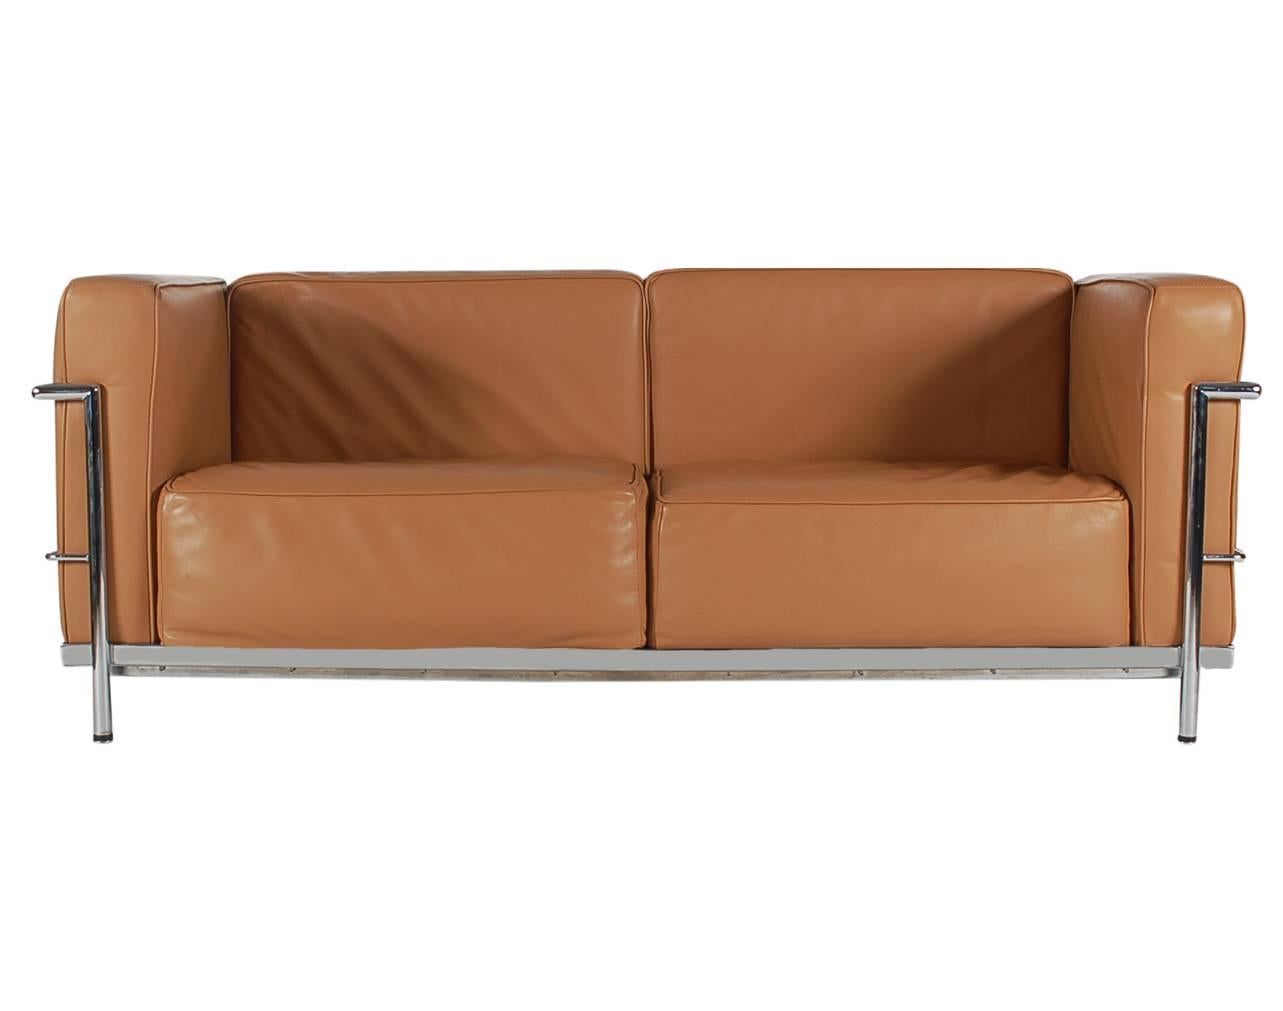 A very nice matching pair of neutral colored leather sofas in the style of Le Corbusier. Probably Italian made, nice quality. They feature chrome-plated steel frames with thick quality leather cushions.